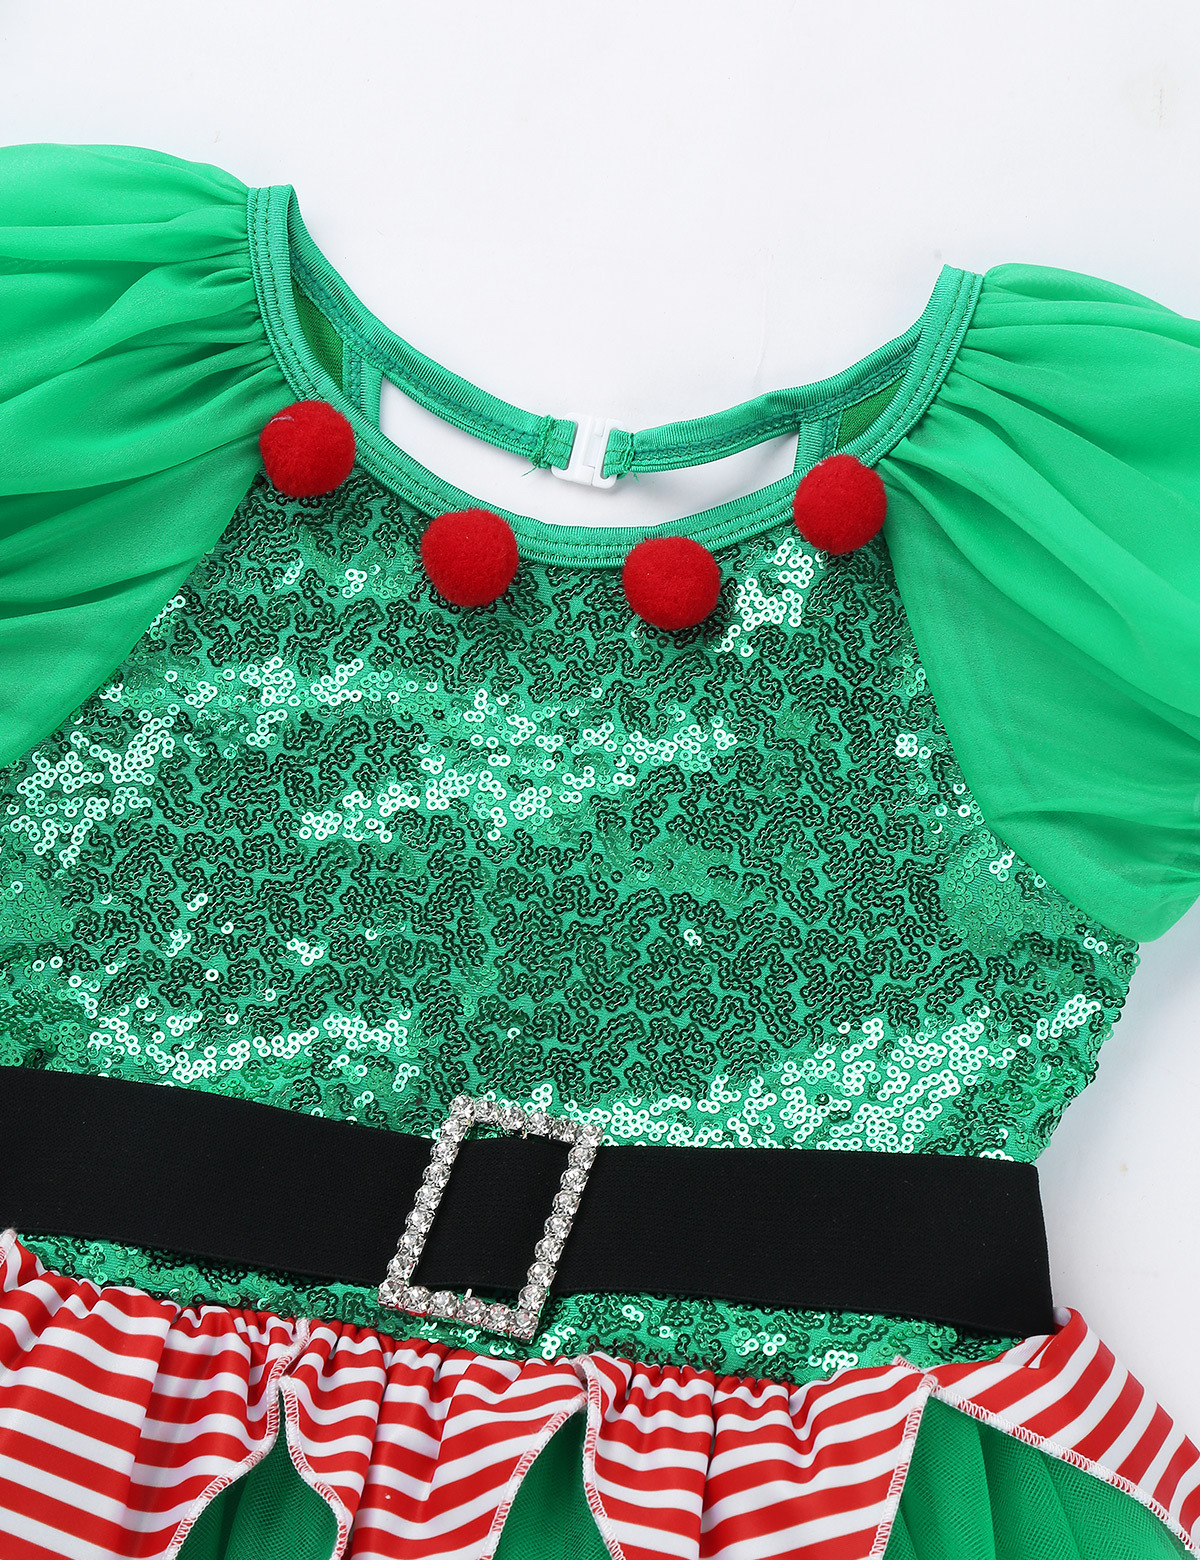 inhzoy Kids Girls Christmas Elf Cosplay Costume Xmas Outfits Sequin Tutu Dress Green 7 - image 5 of 7